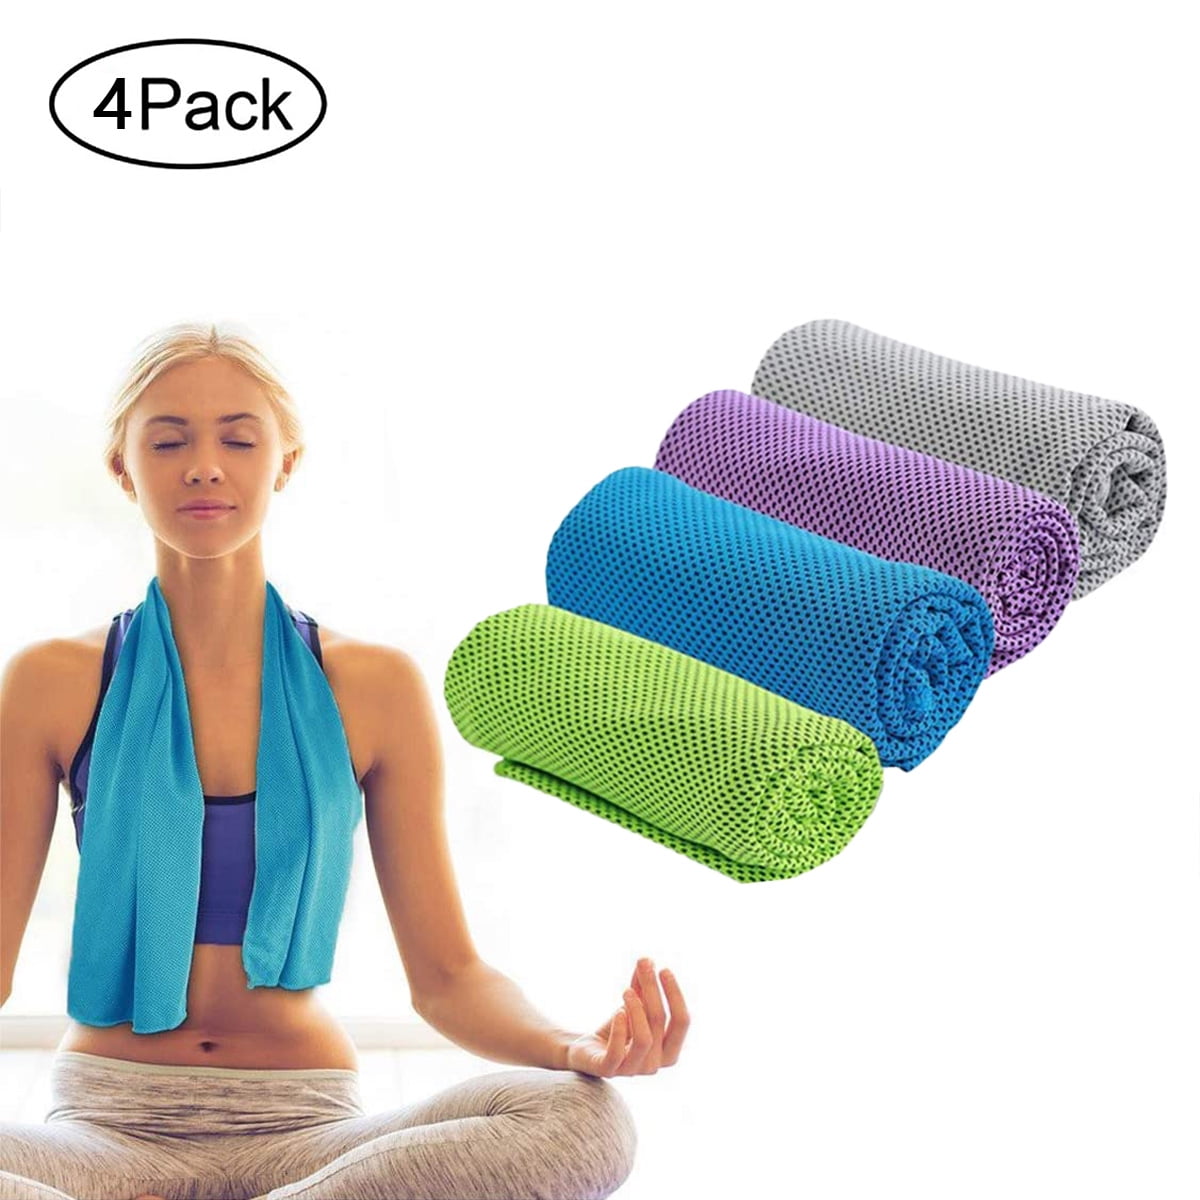 Gym Sports Cooling Towel Instant Chilling Cold Towels Instant Relief Neck Wrap Scarf for Sports Camping Yoga Pilates Travel Fitness Instant Relief for Cold & Hot Therapy& More Workout 